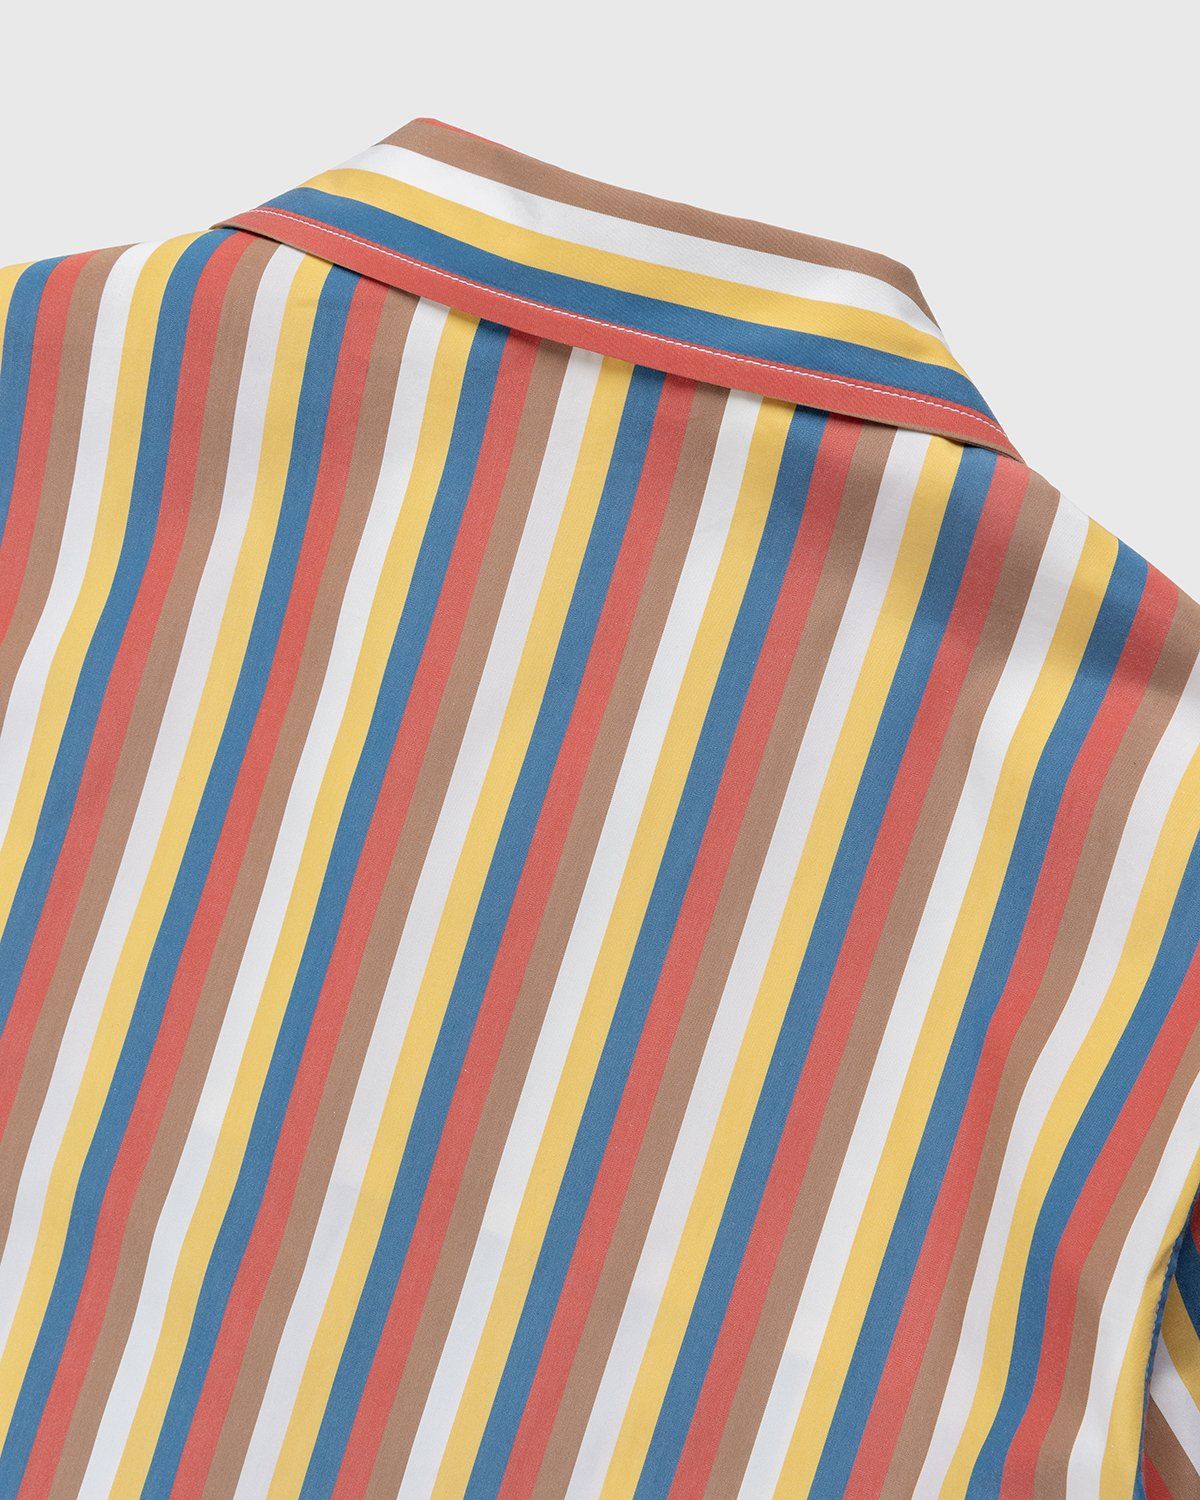 Jil Sander – Striped Vacation Shirt Red/White - Shirts - Red - Image 4